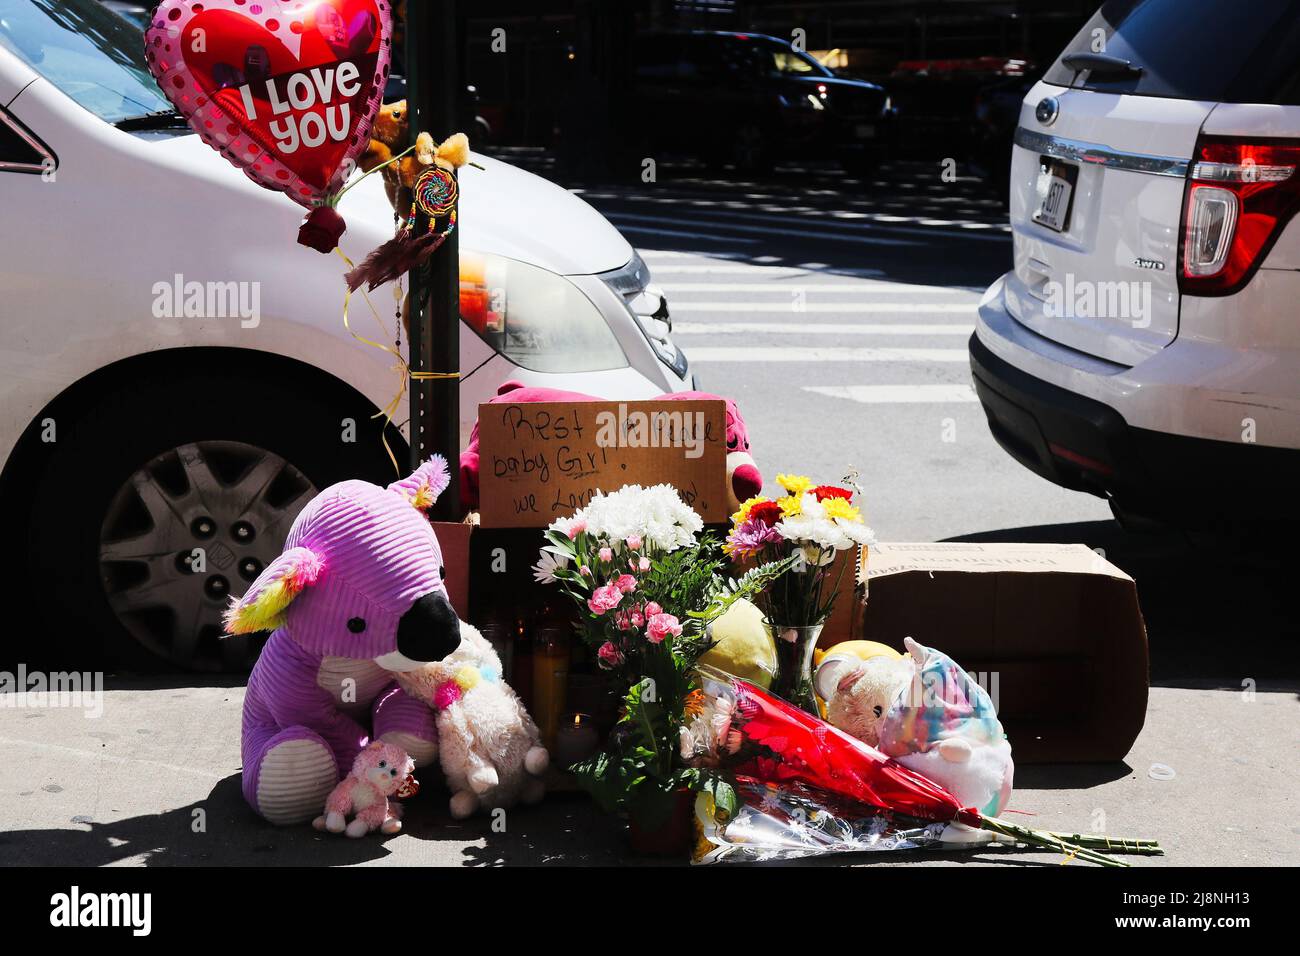 Sidewalk Memorial for 11-Year-Old Killed in Shooting, New York, NY USA Stock Photo